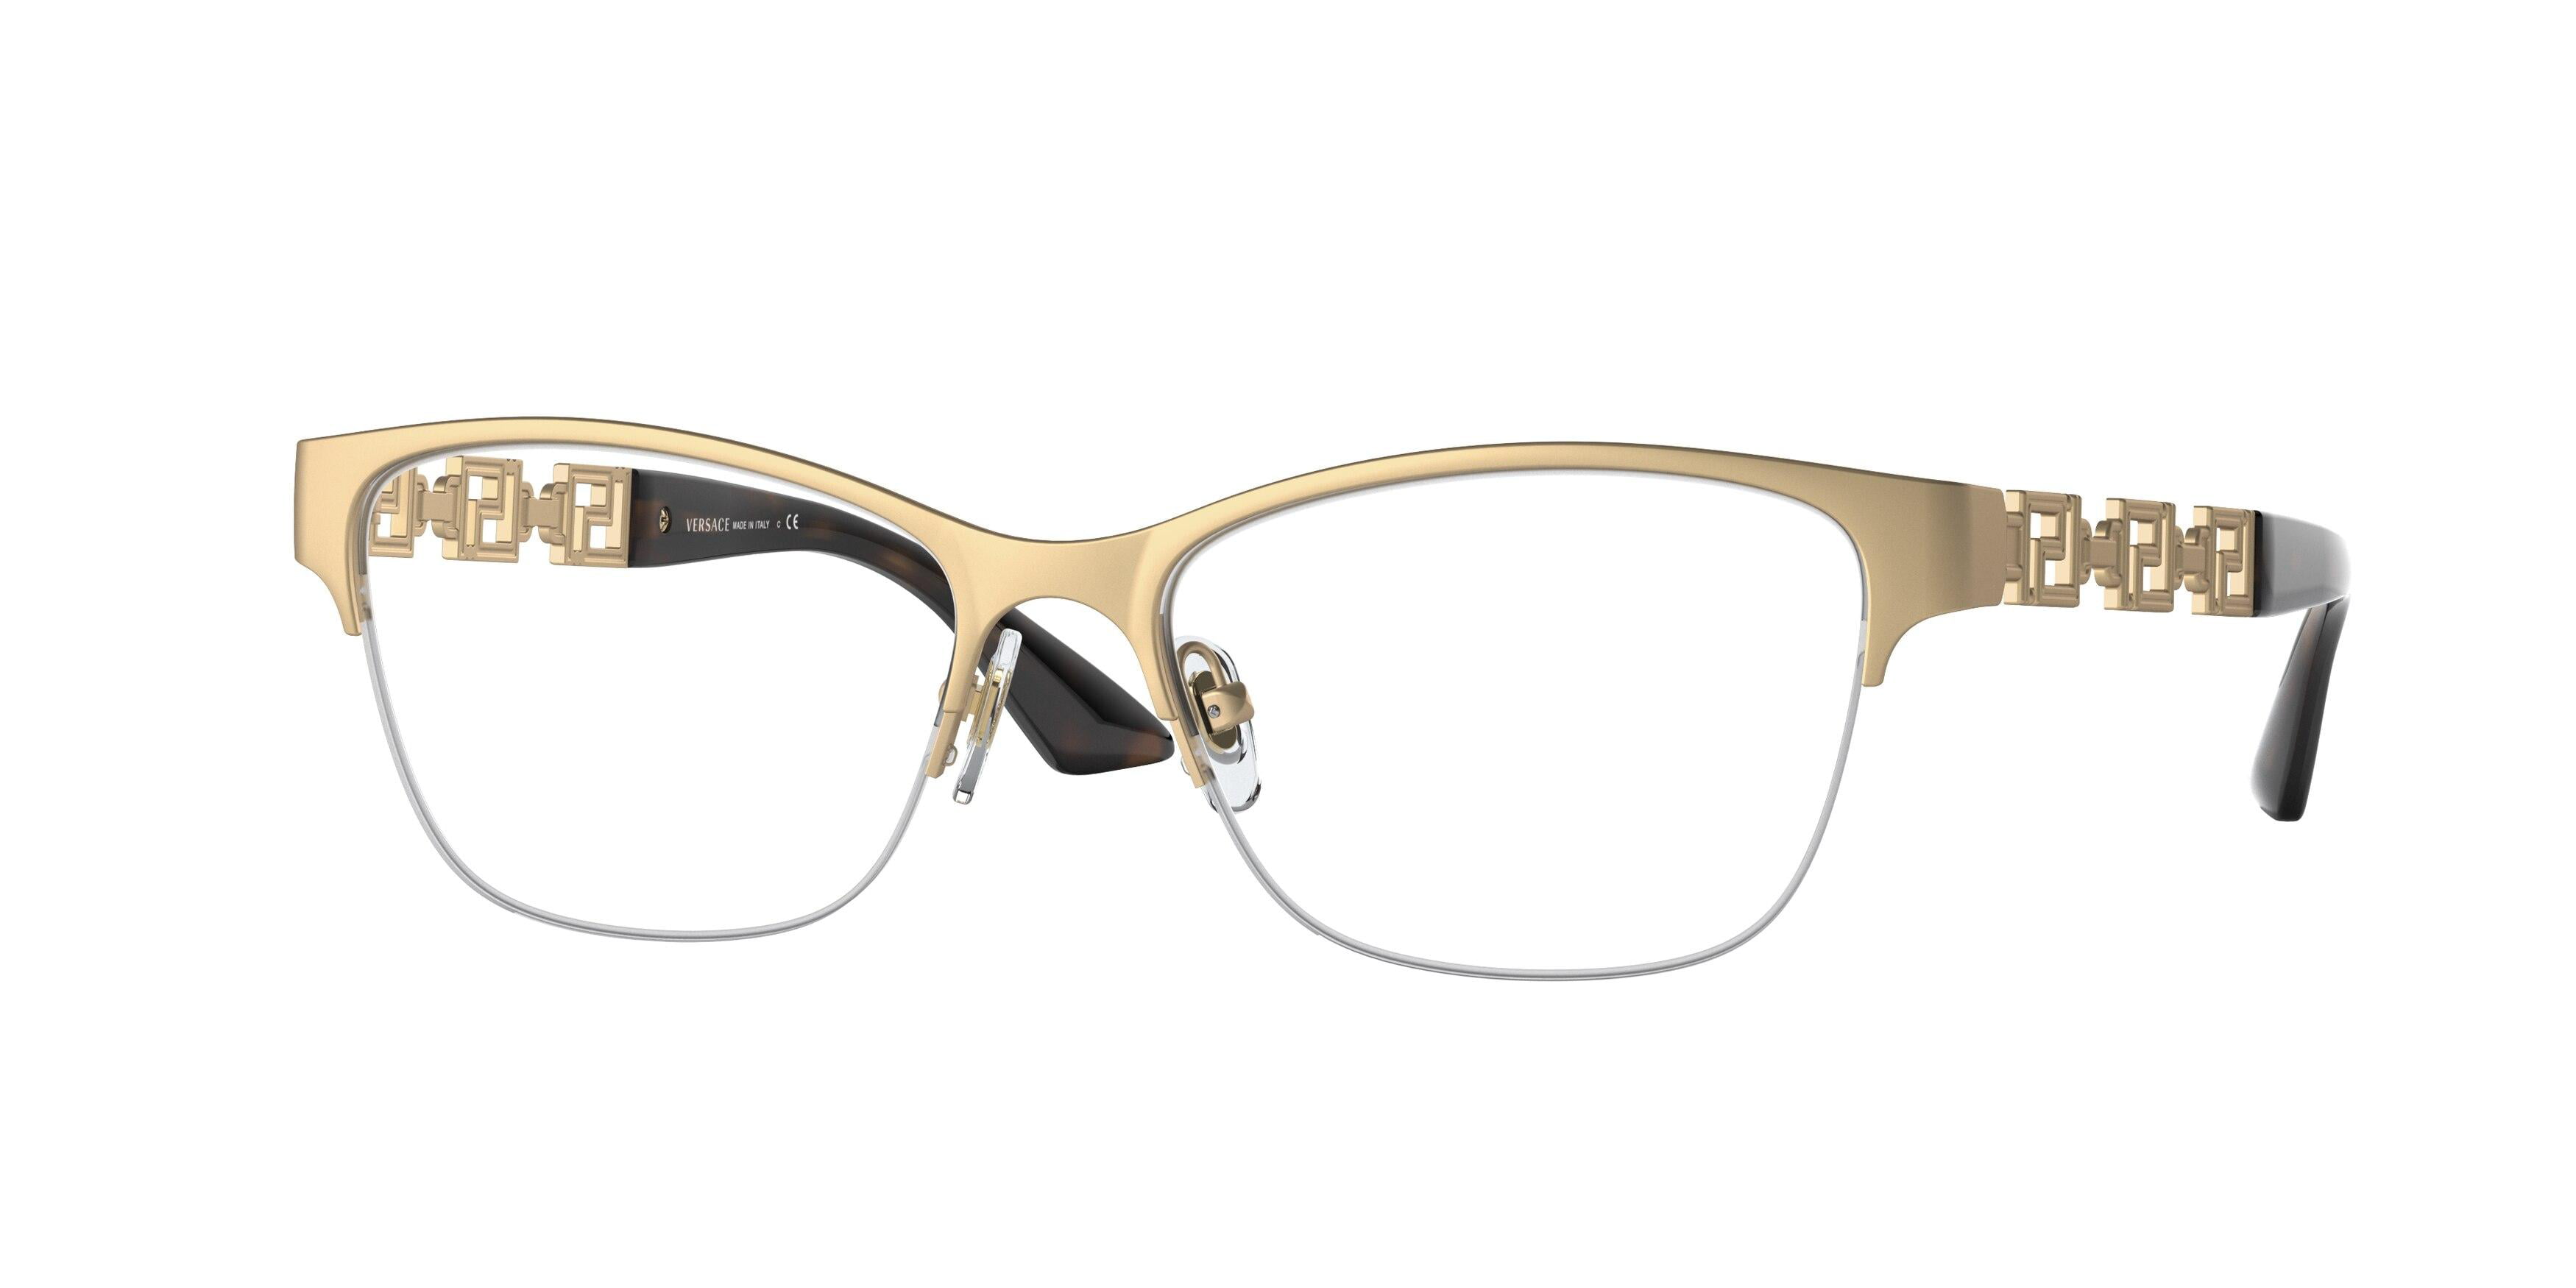 VERSACE PRESCRIPTION 1175B 1002 53MM PALE GOLD FRAME WITH CLEAR DEMO LENSES 